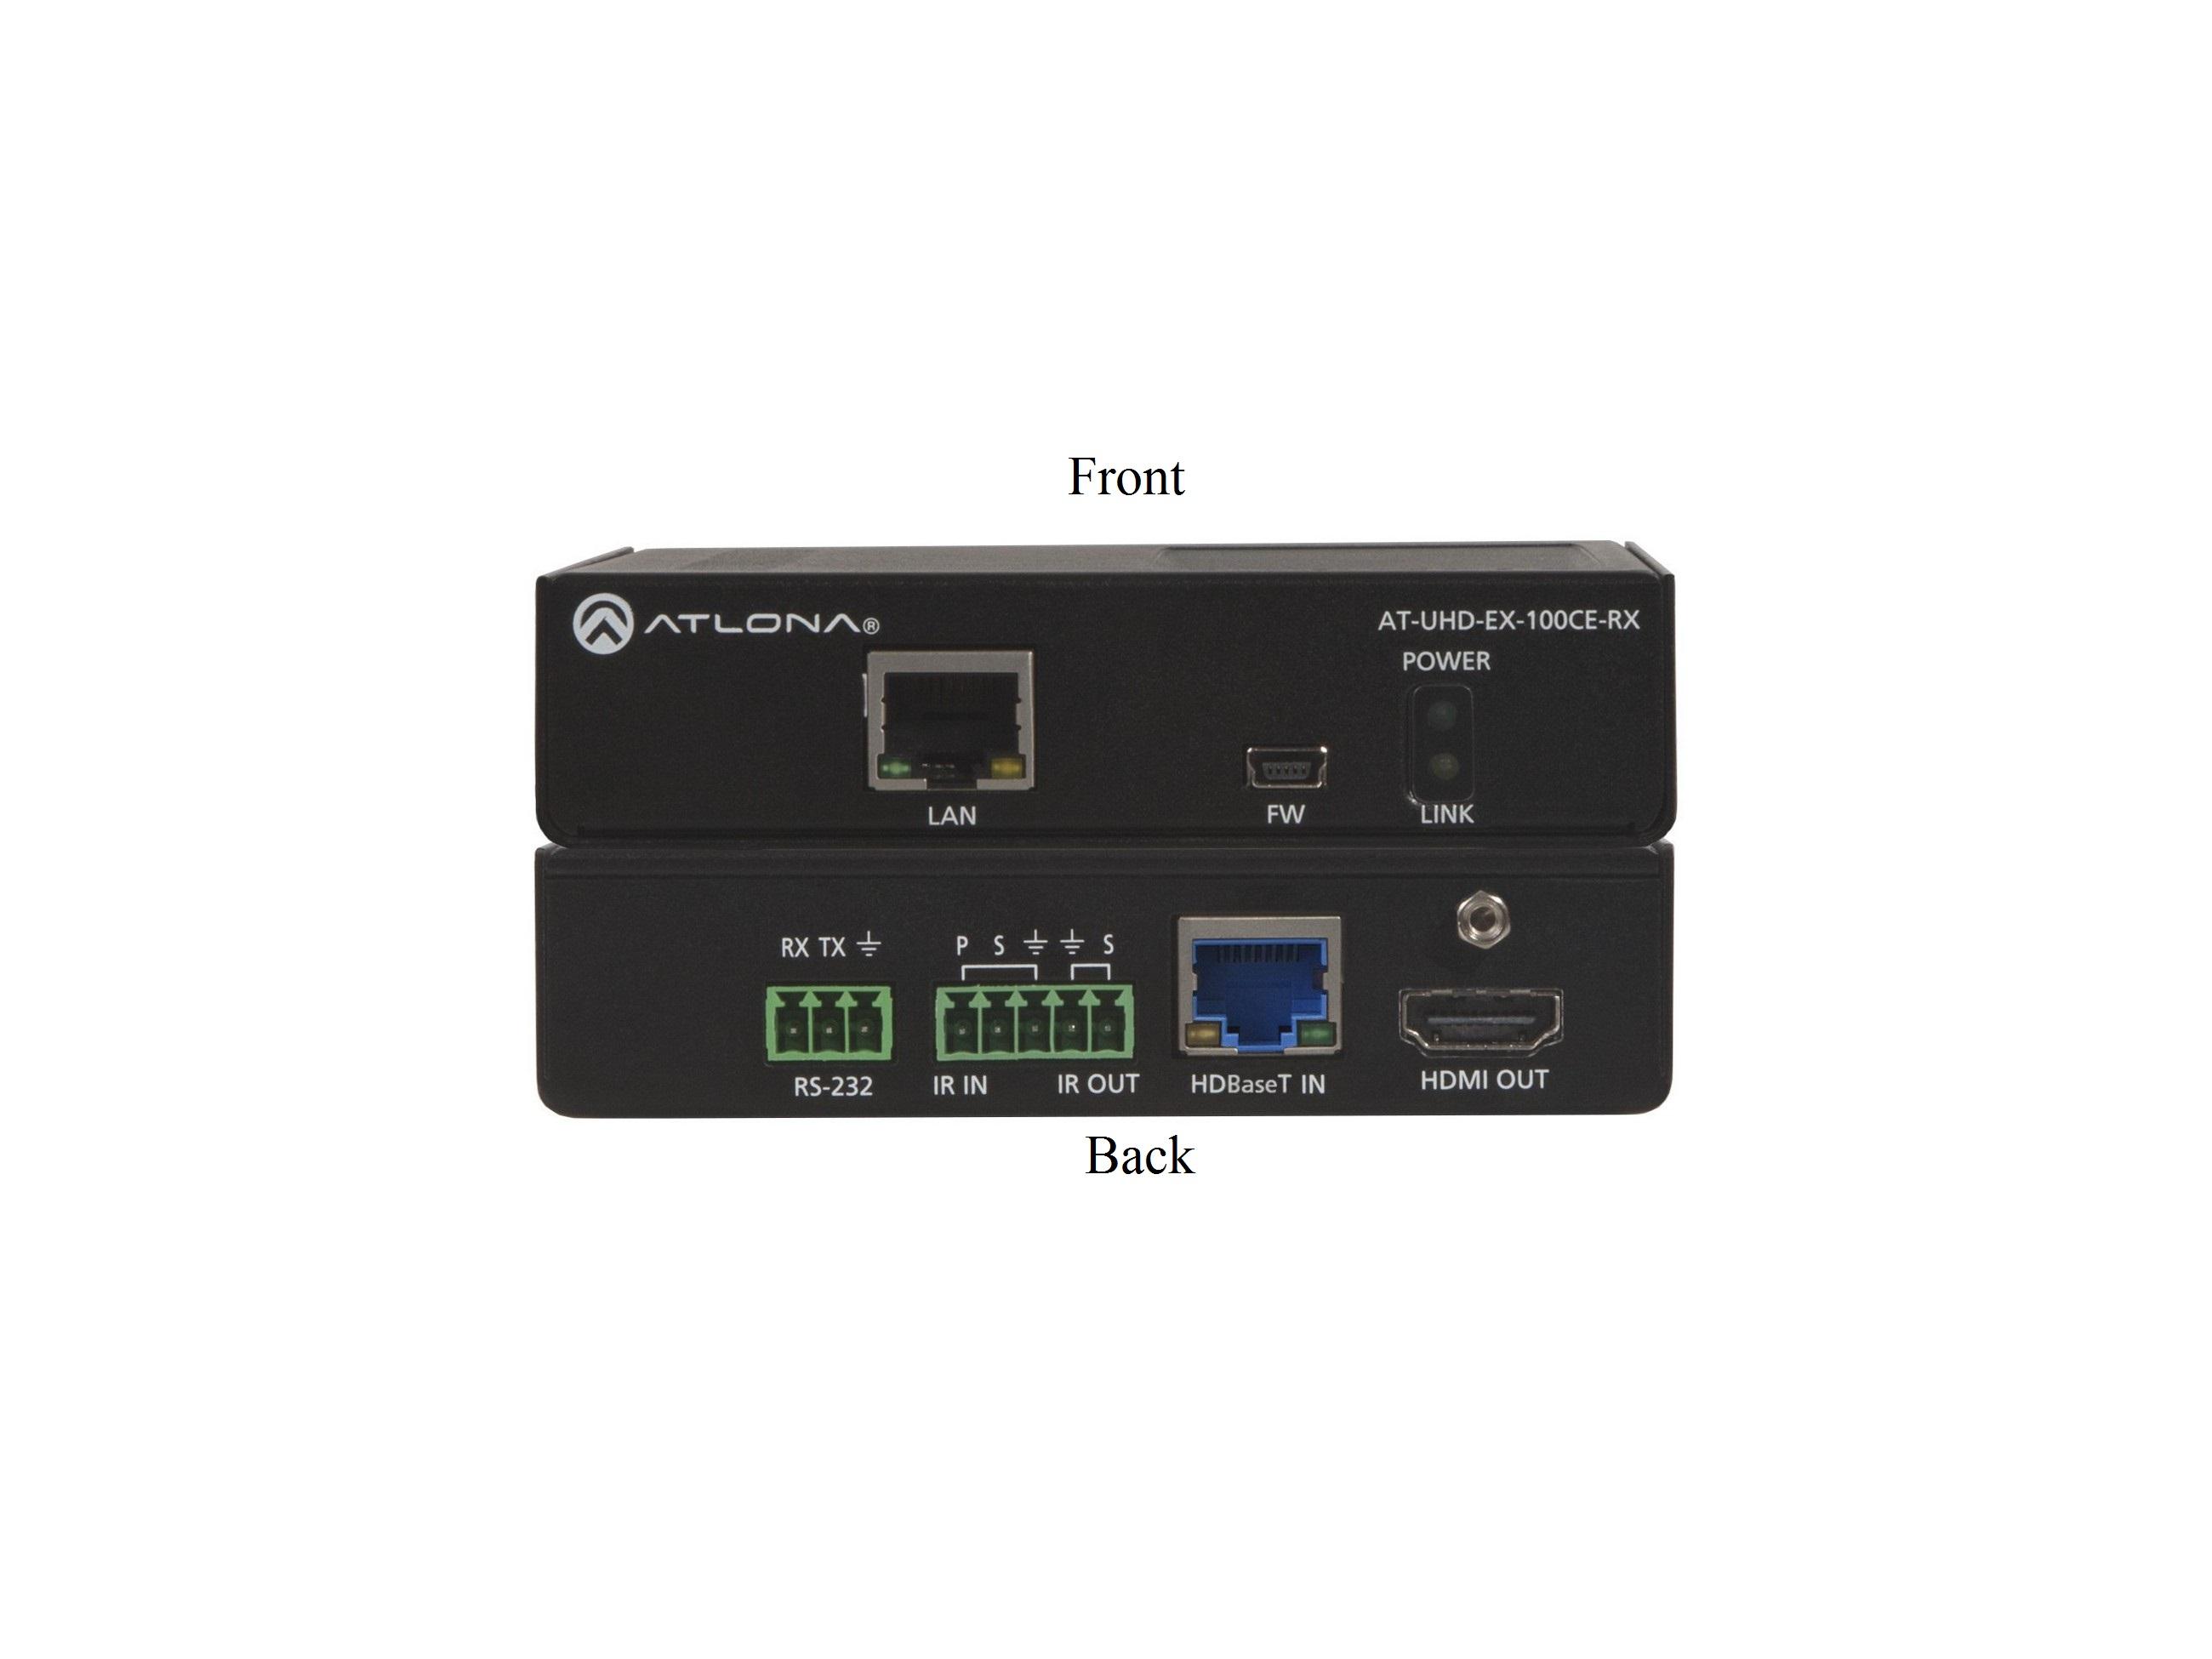 AT-UHD-EX-100CE-RX 4K/UHD HDMI/HDBaseT Extender (Receiver) NET/PoE by Atlona